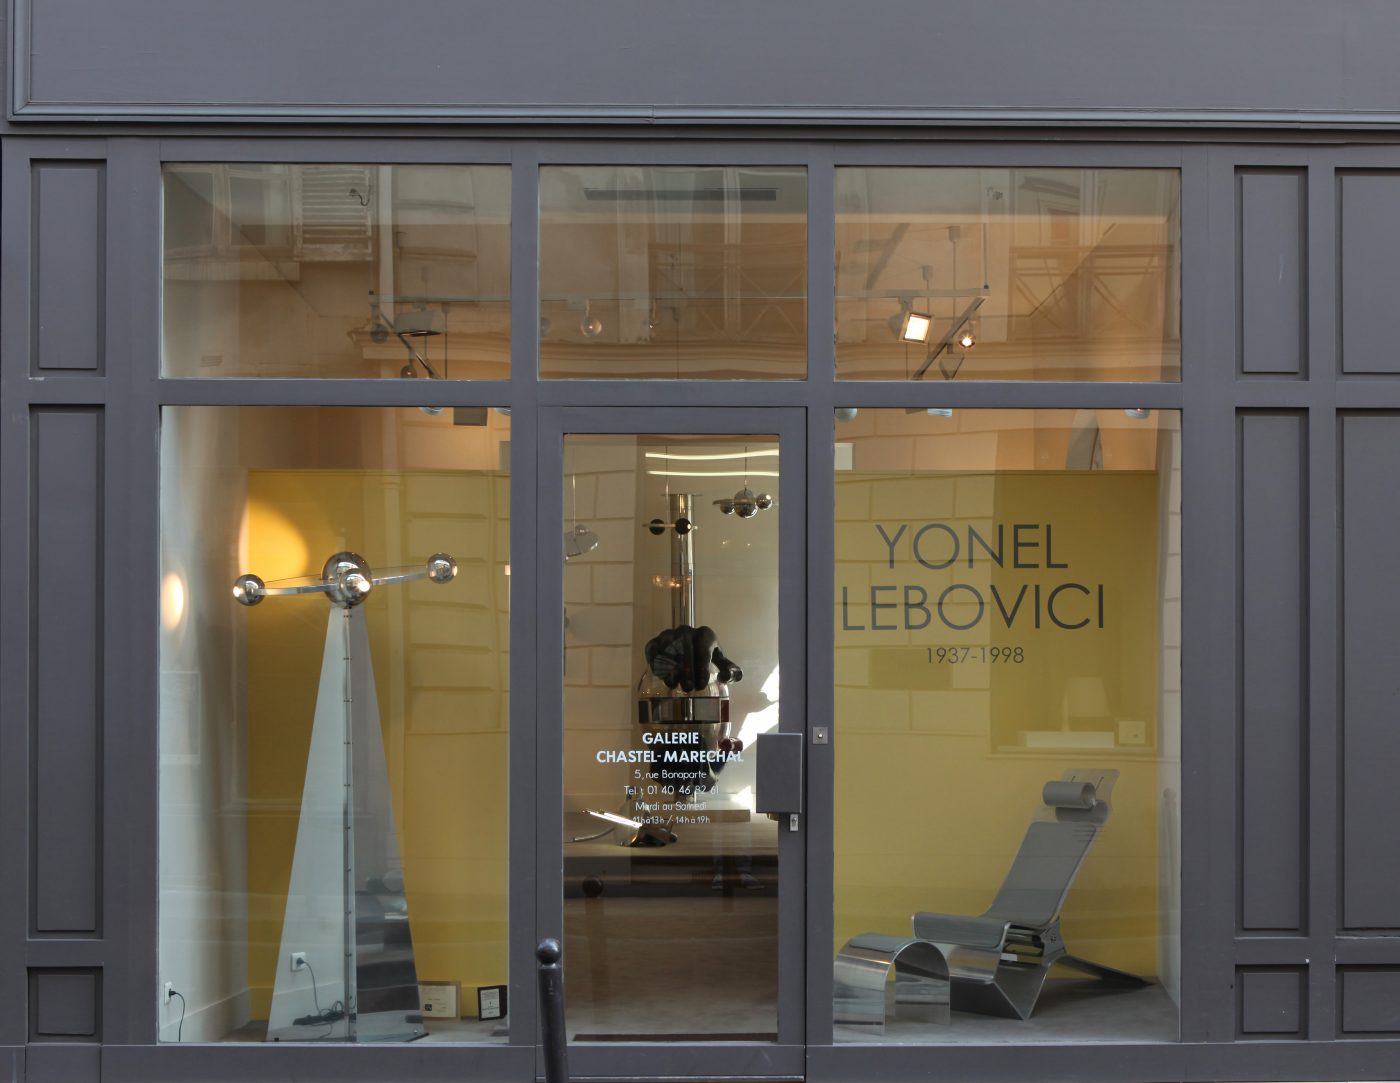 YONEL LEBOVICI, “Exposition Yonel Lebovici (1937-1998)”, Galerie Chastel-Maréchal, from september 5th to october 5th, 2014